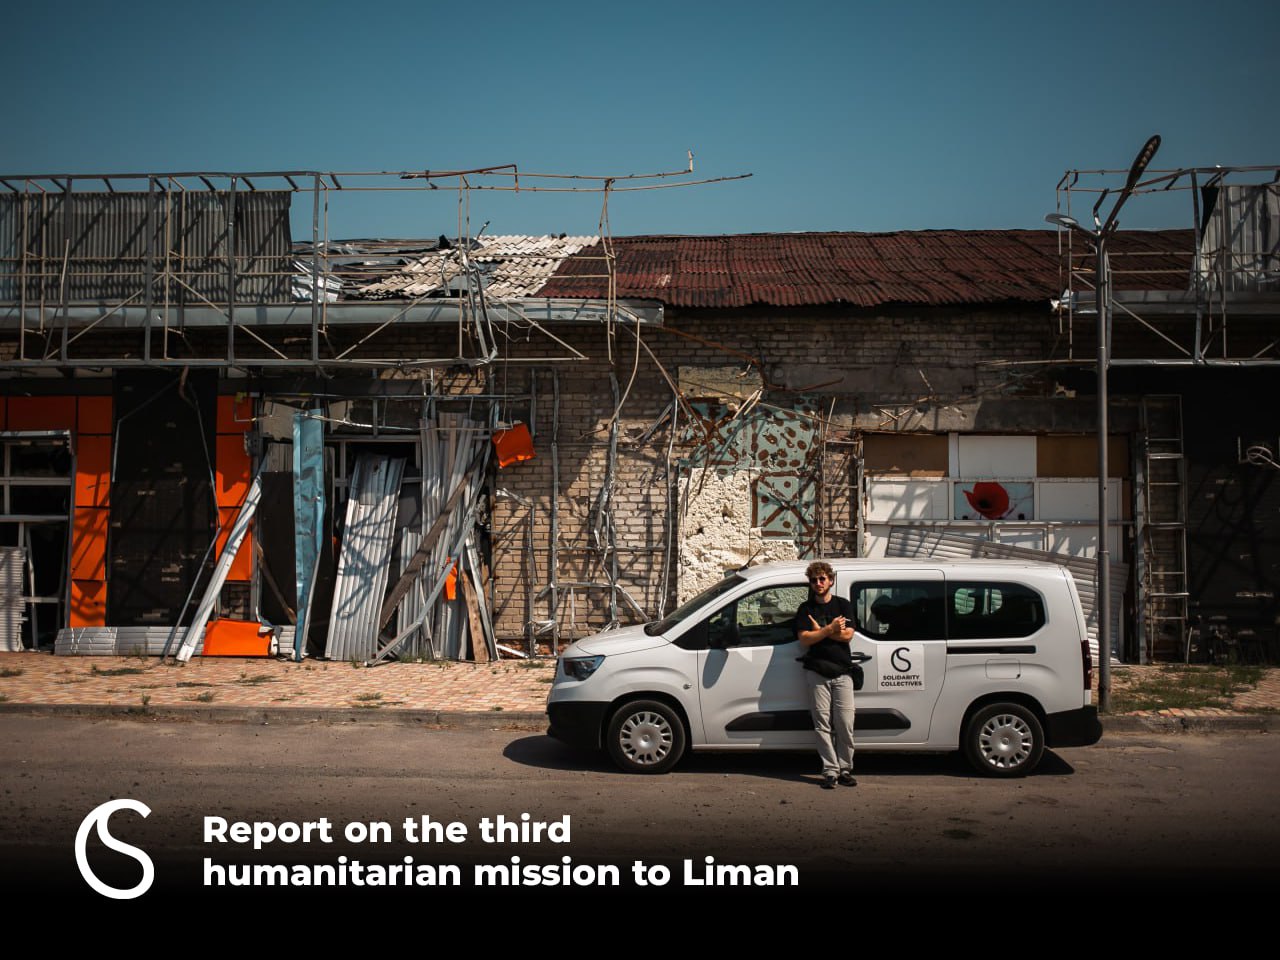 Report on the Third Humanitarian Mission to Lyman